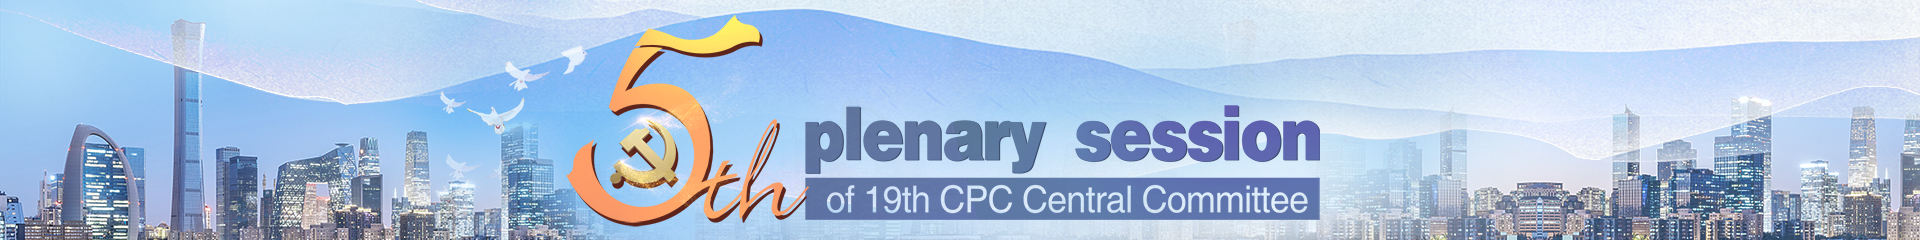 5th plenary session of 19th CPC Central Committee